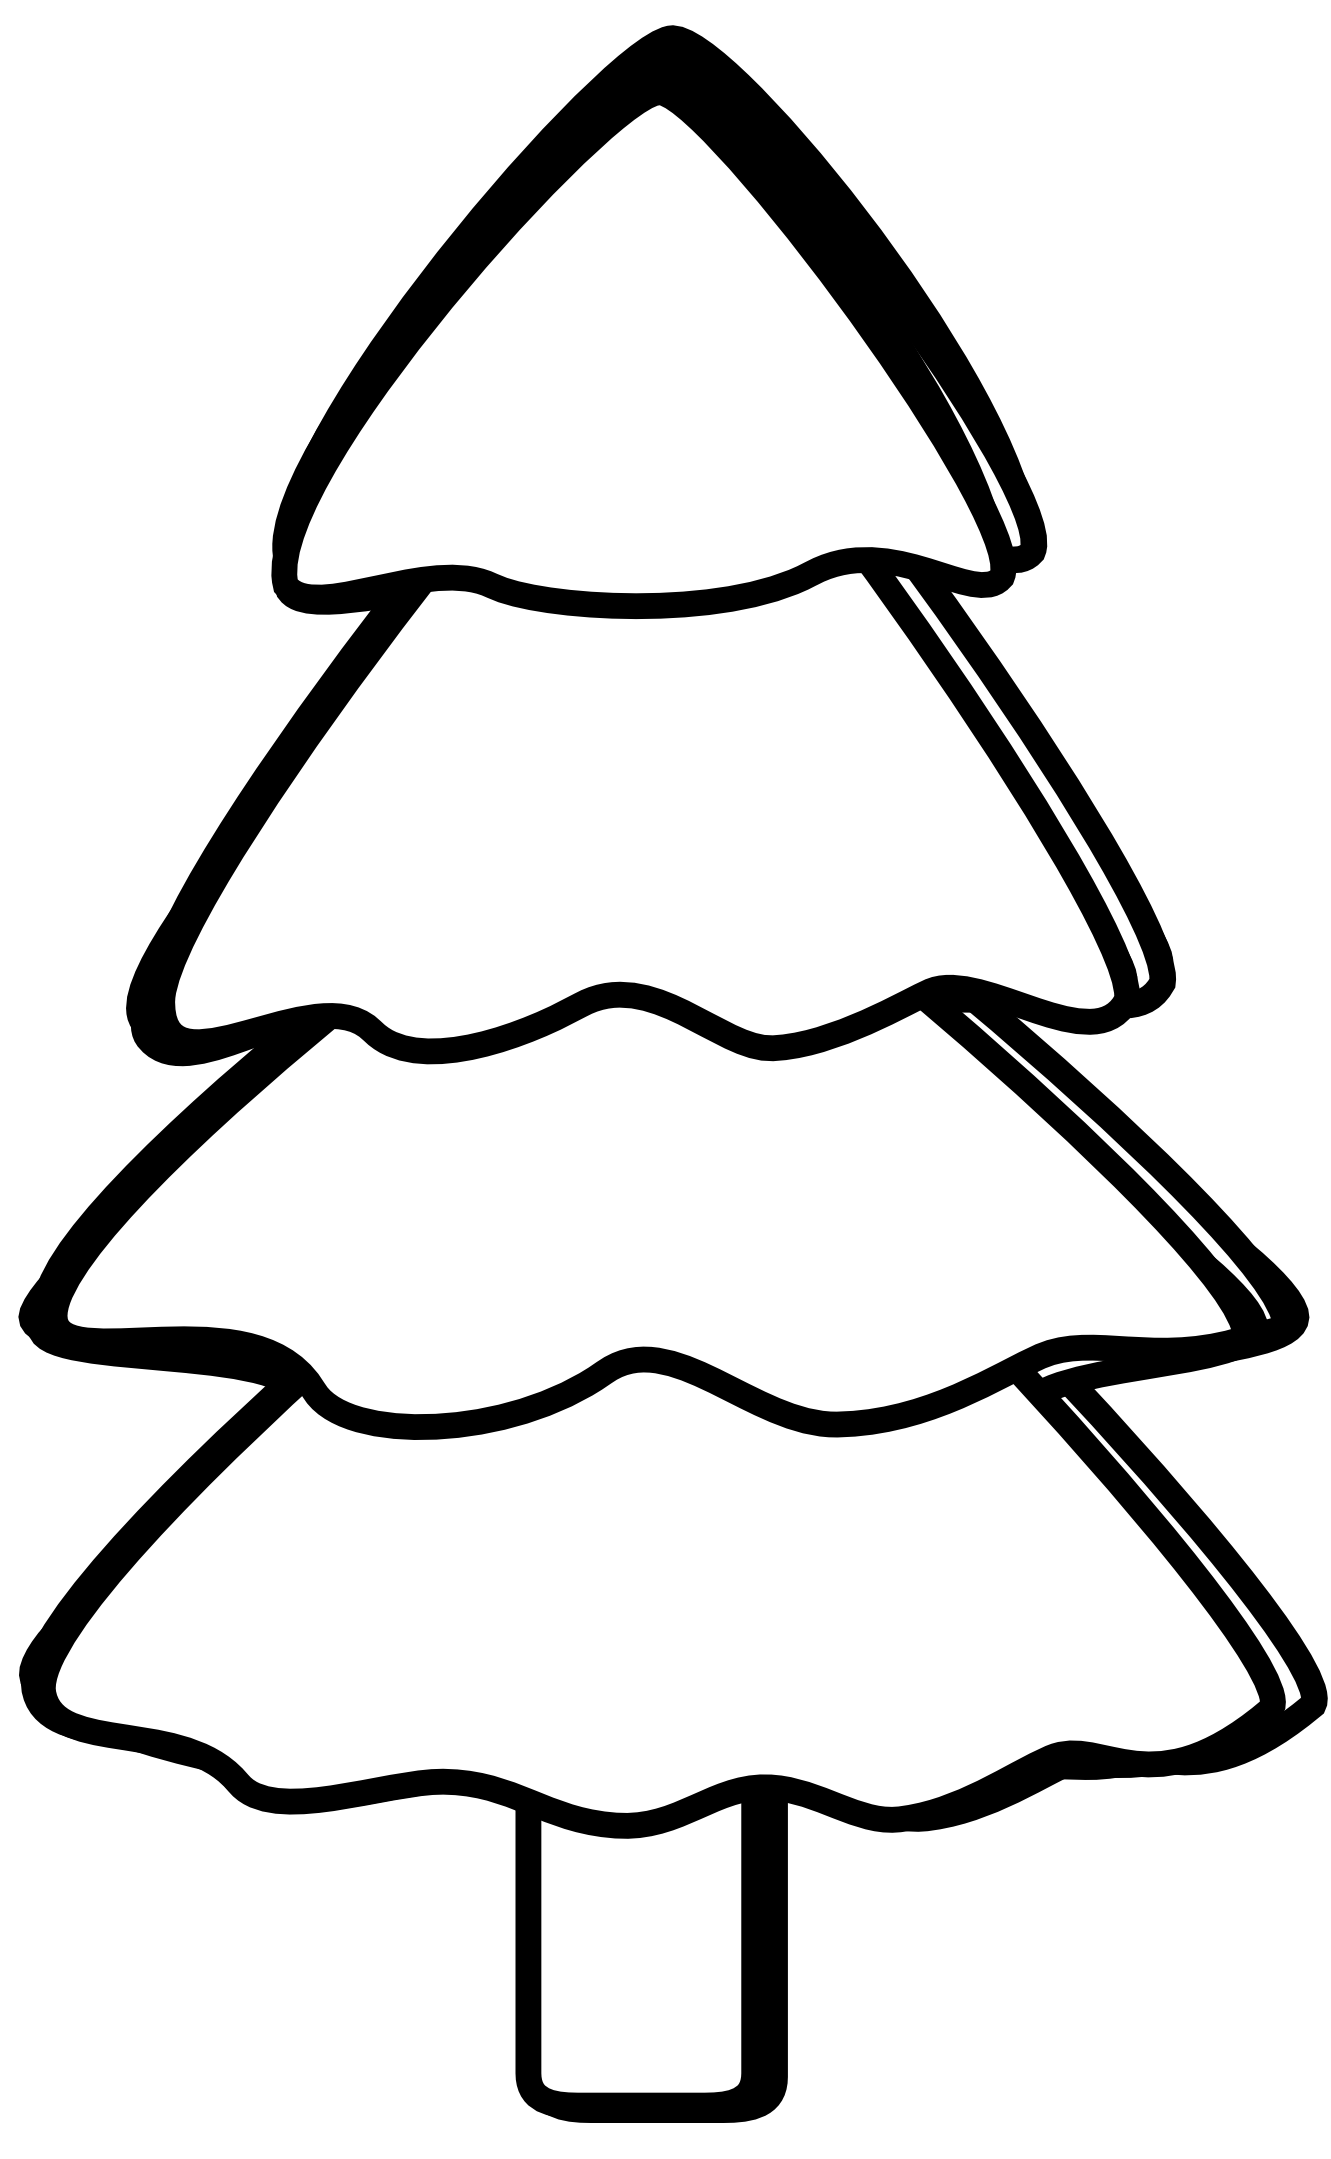 Oak Tree Clipart Black And White - Free Clipart Images